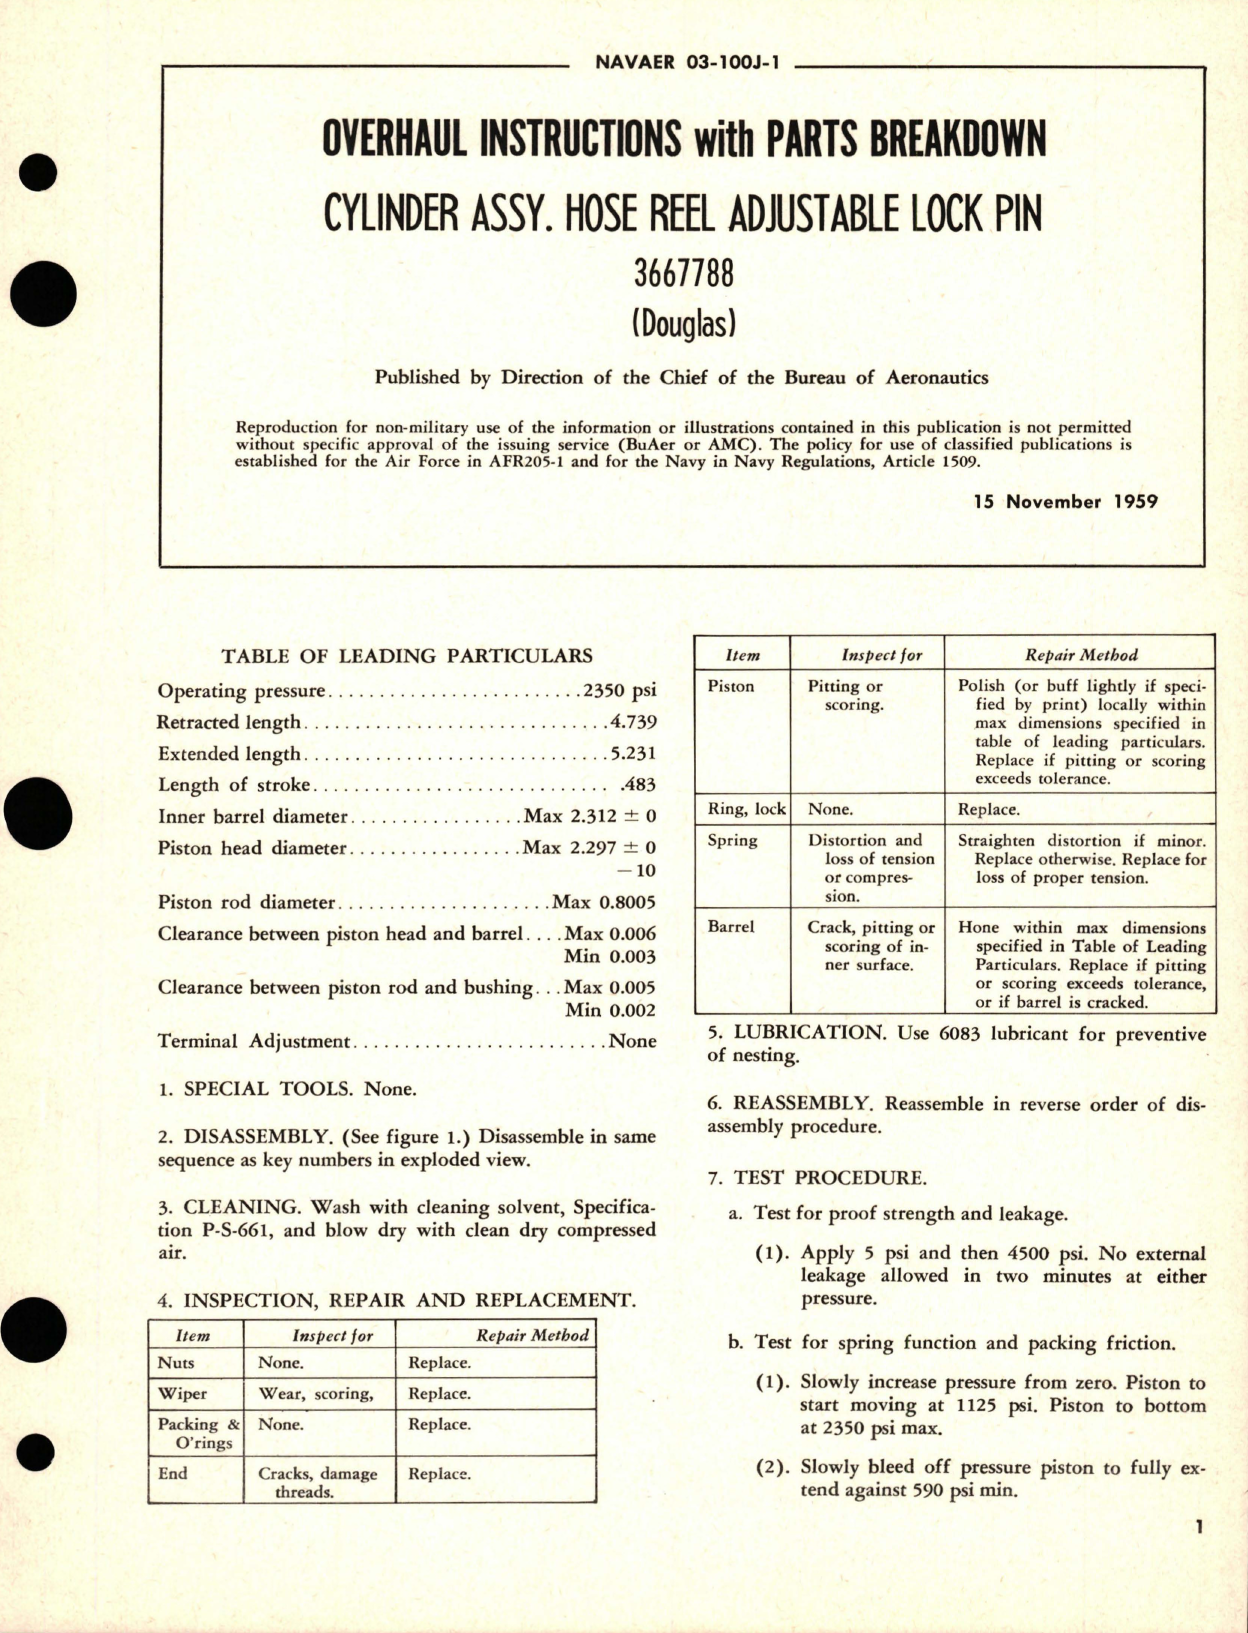 Sample page 1 from AirCorps Library document: Overhaul Instructions with Parts Breakown for Hose Reel Adjustable Lock Pin Cylinder Assembly - 3667788